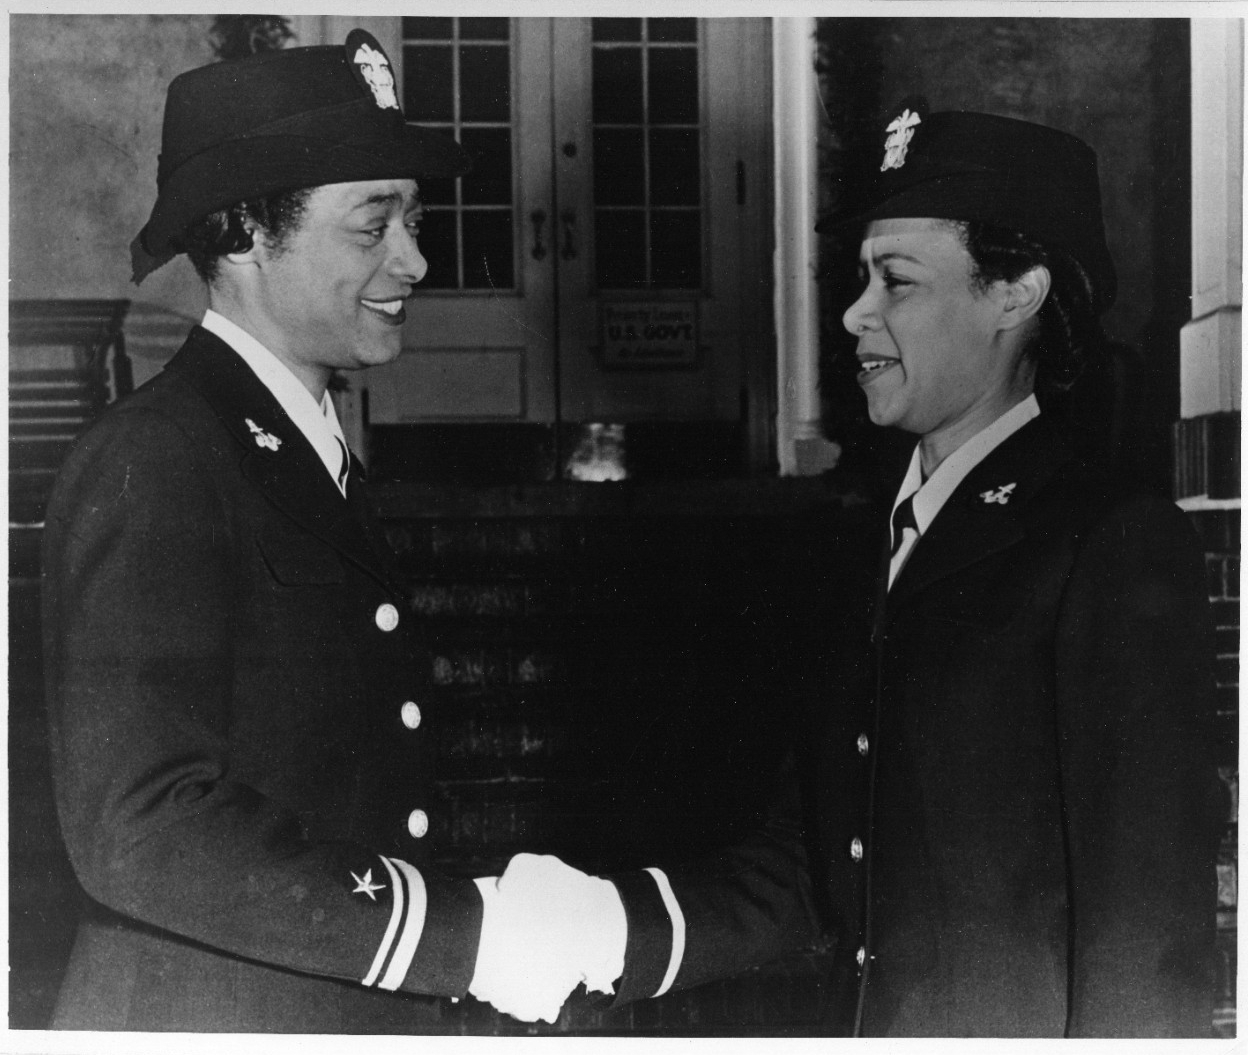 Lieutenant (Junior Grade) Harriet Ida Pickens (left), and Ensign Frances Wills congratulate each other after being being commissioned as the first African-American WAVES officers, December 1944. They were members of the final graduating class of the Naval Reserve Midshipmen's School (WR) at Northampton, Massachusetts. U.S. Naval History and Heritage Command Photograph.